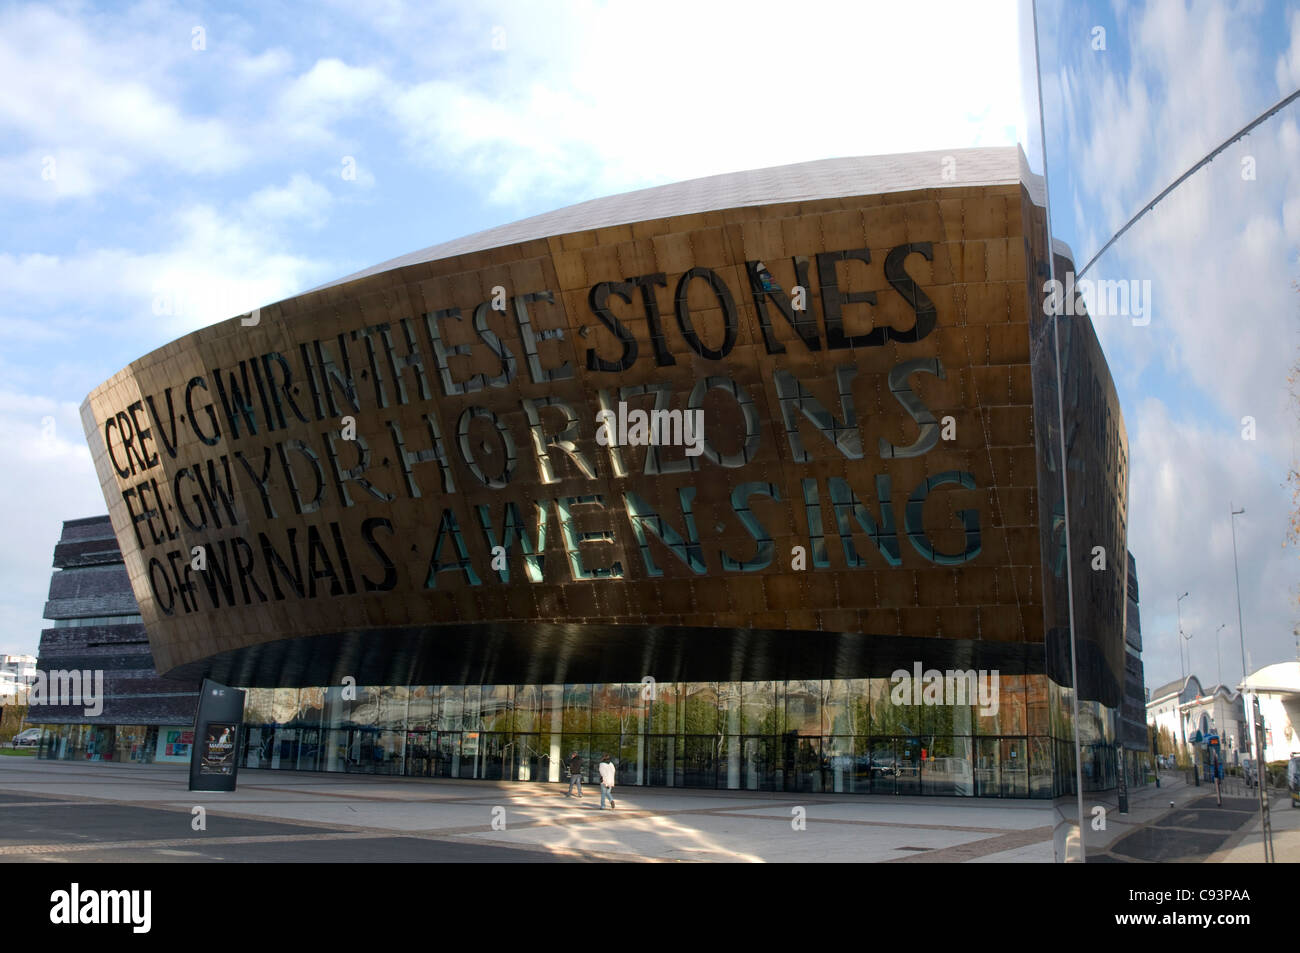 The Wales Millennium centre, Canolfan Mileniwm Cymru in Cardiff reflected in the water tower. Stock Photo